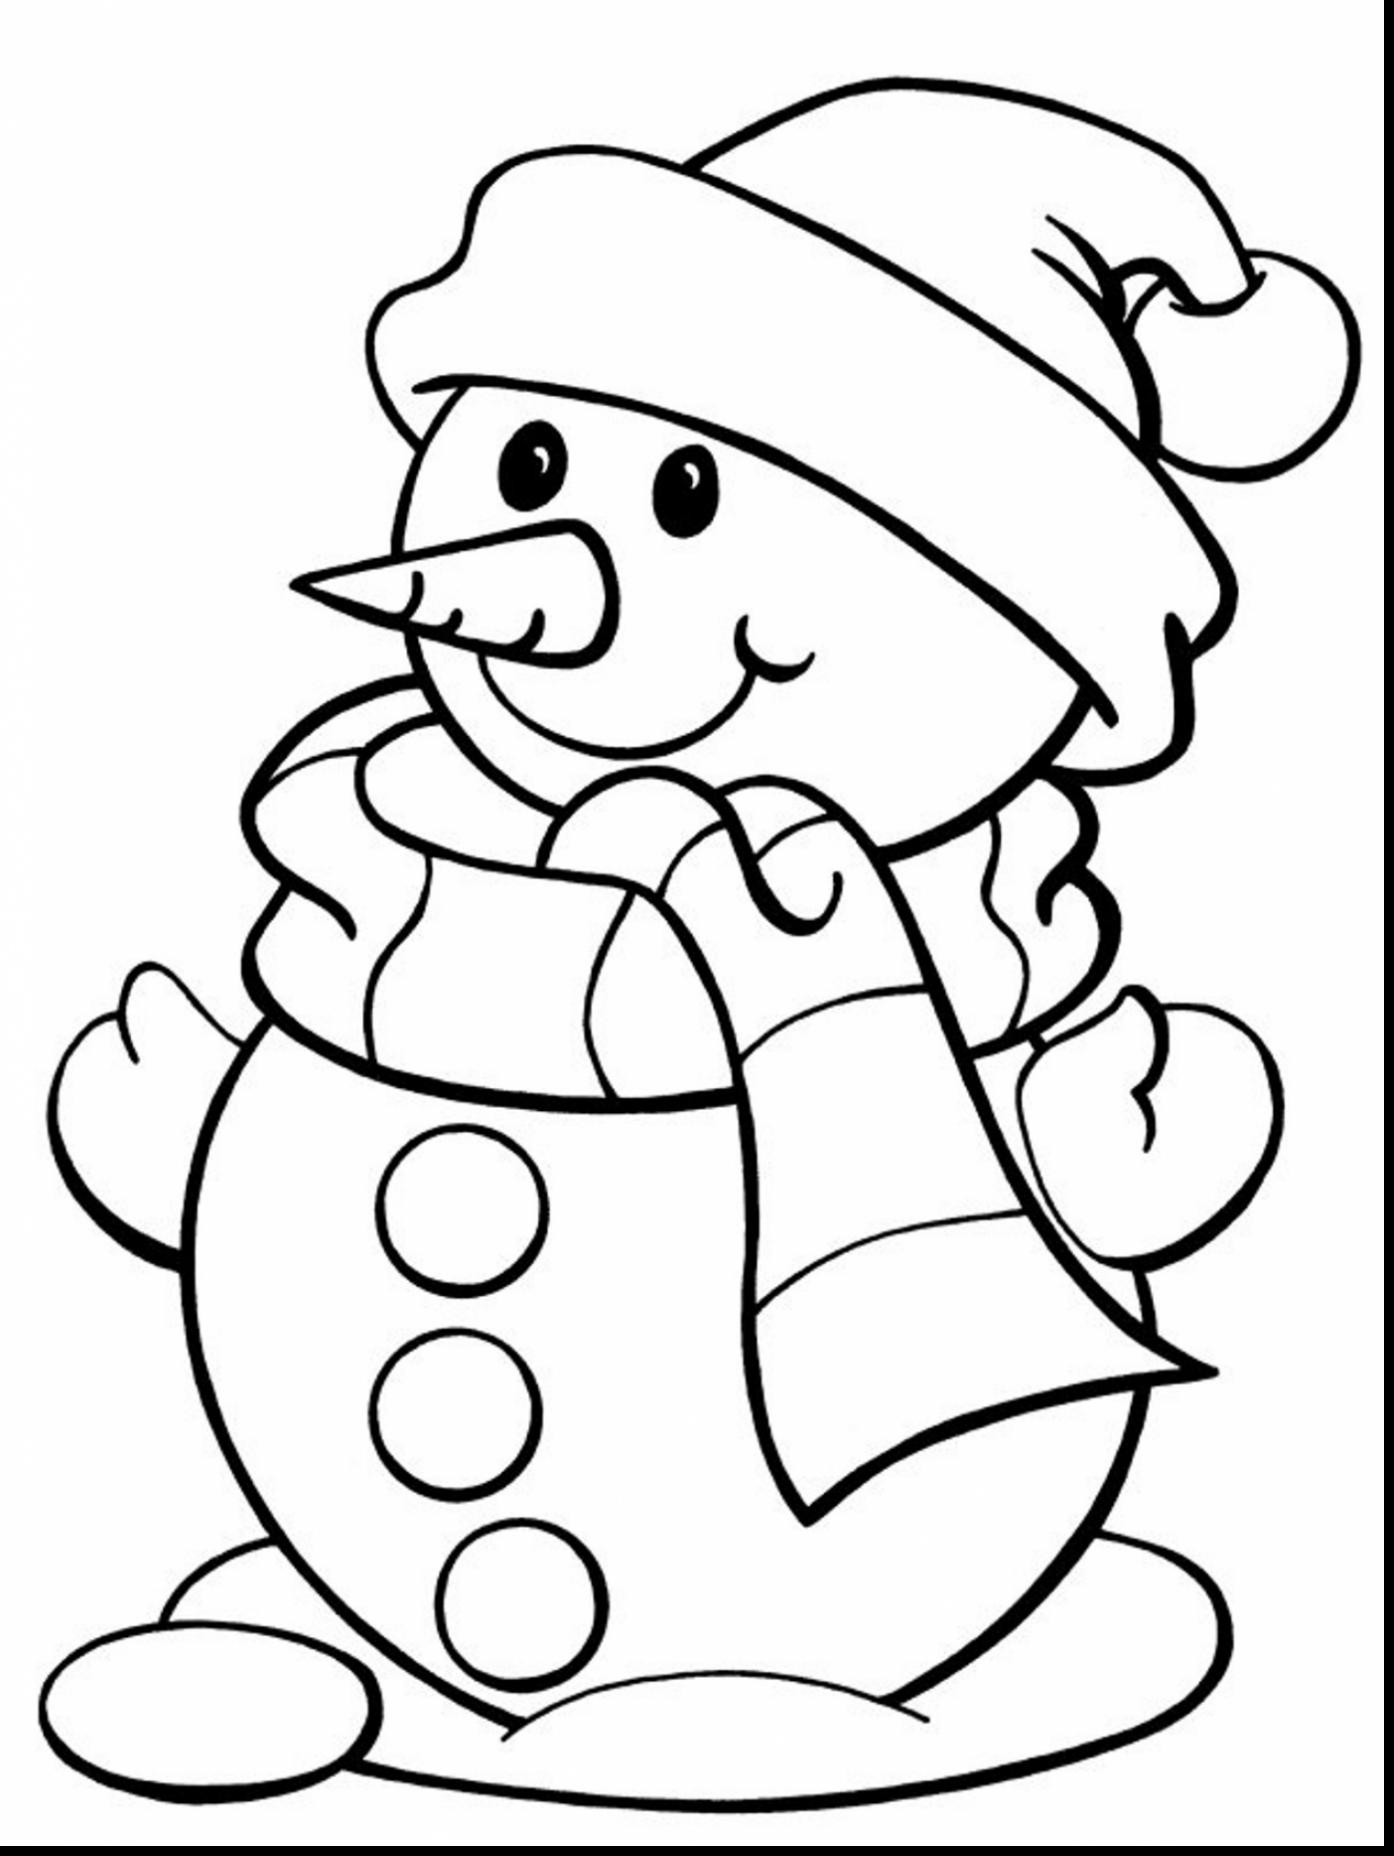 snowman-coloring-pages-at-getcolorings-free-printable-colorings